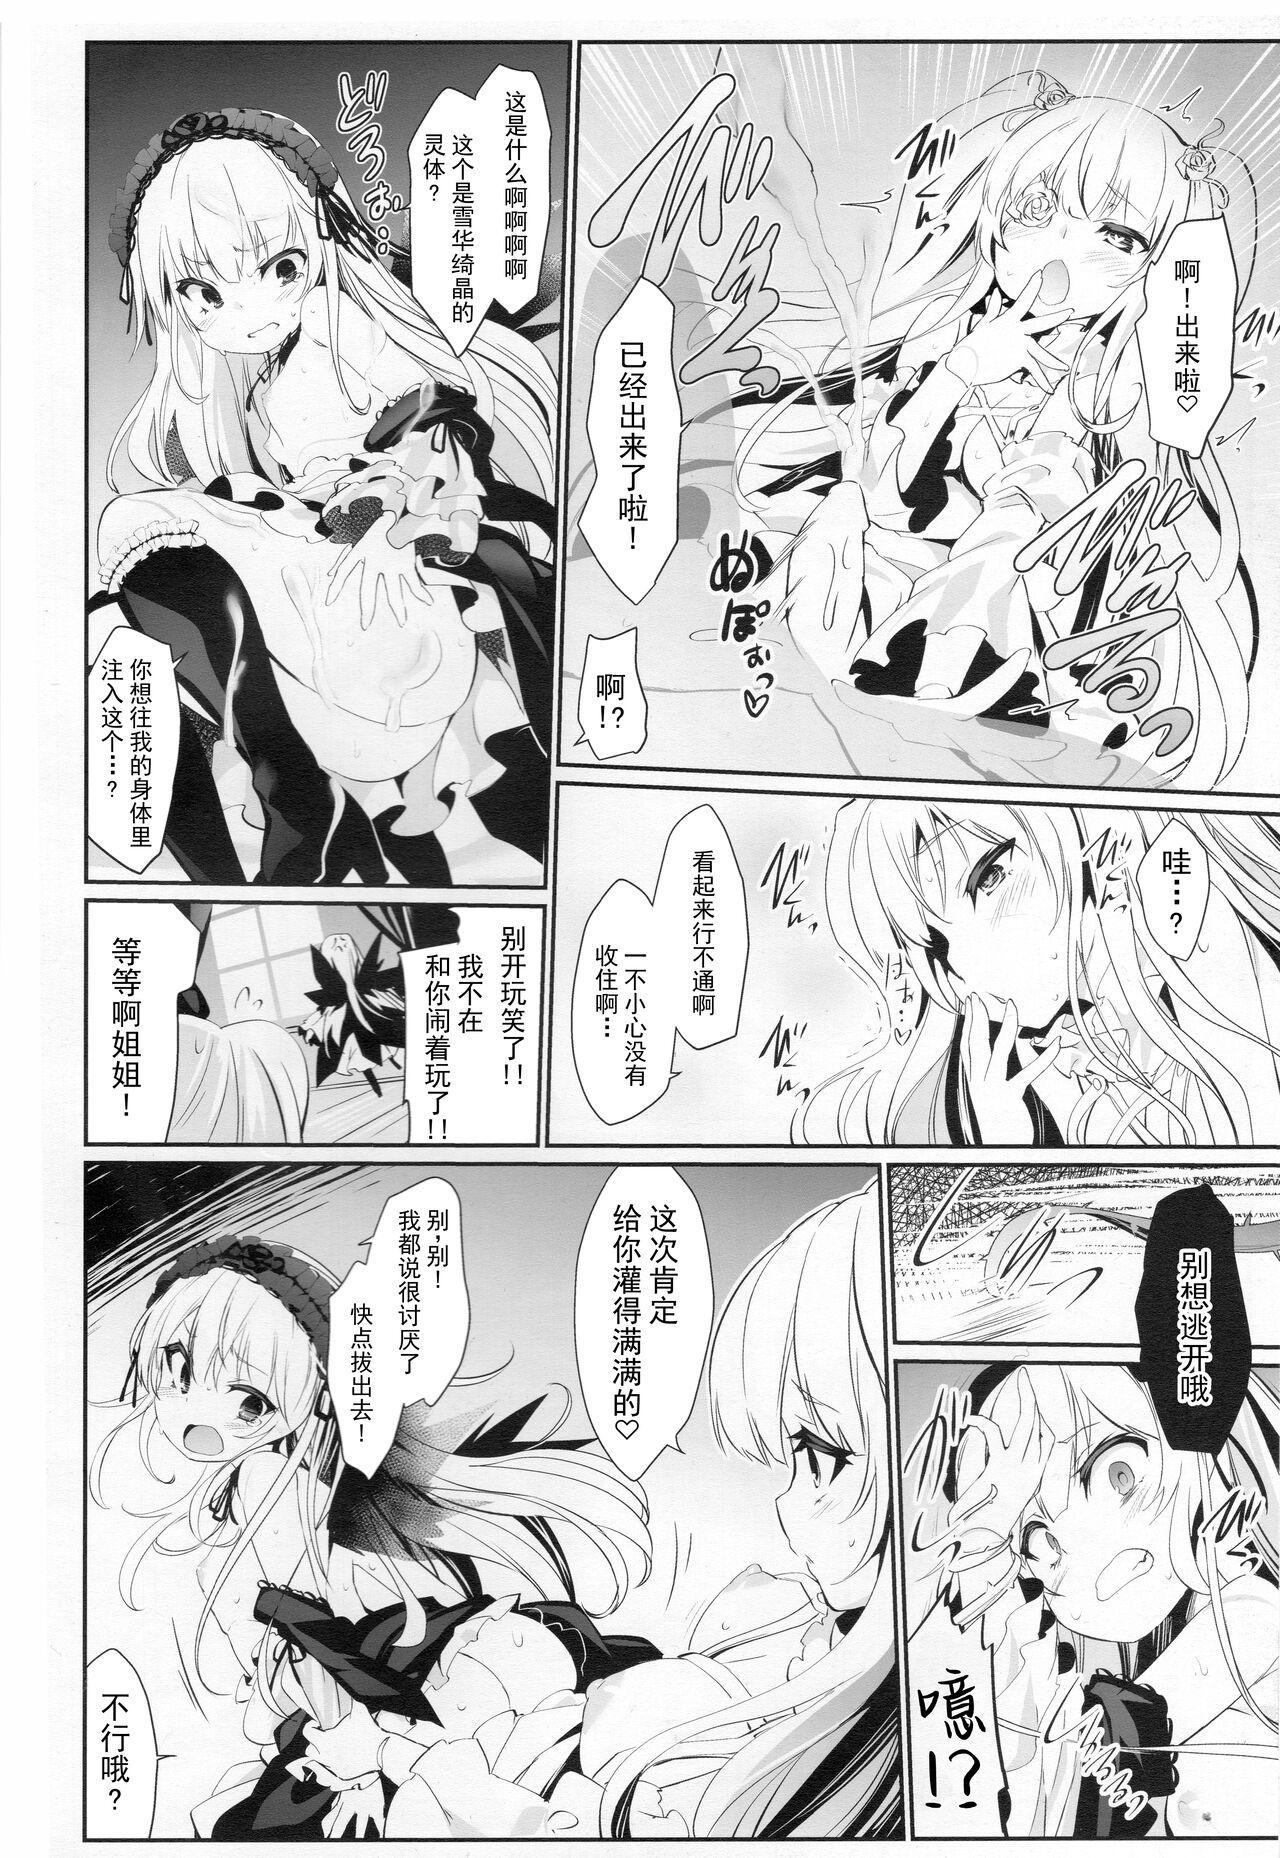 Suckingcock Glamour Growth - Rozen maiden Rabo - Page 7